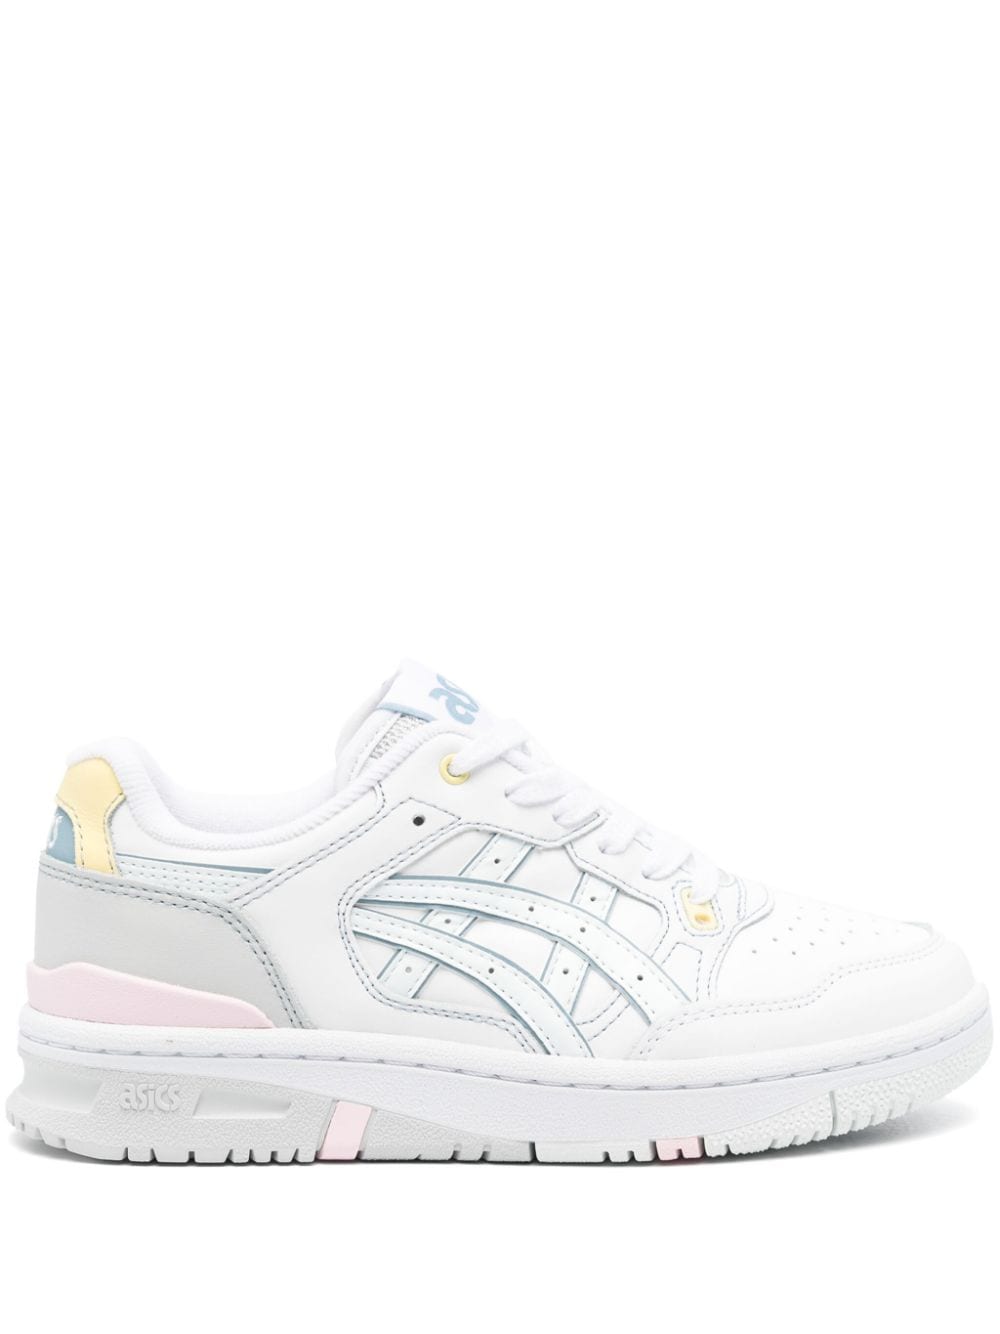 Image 1 of ASICS EX89 leather sneakers